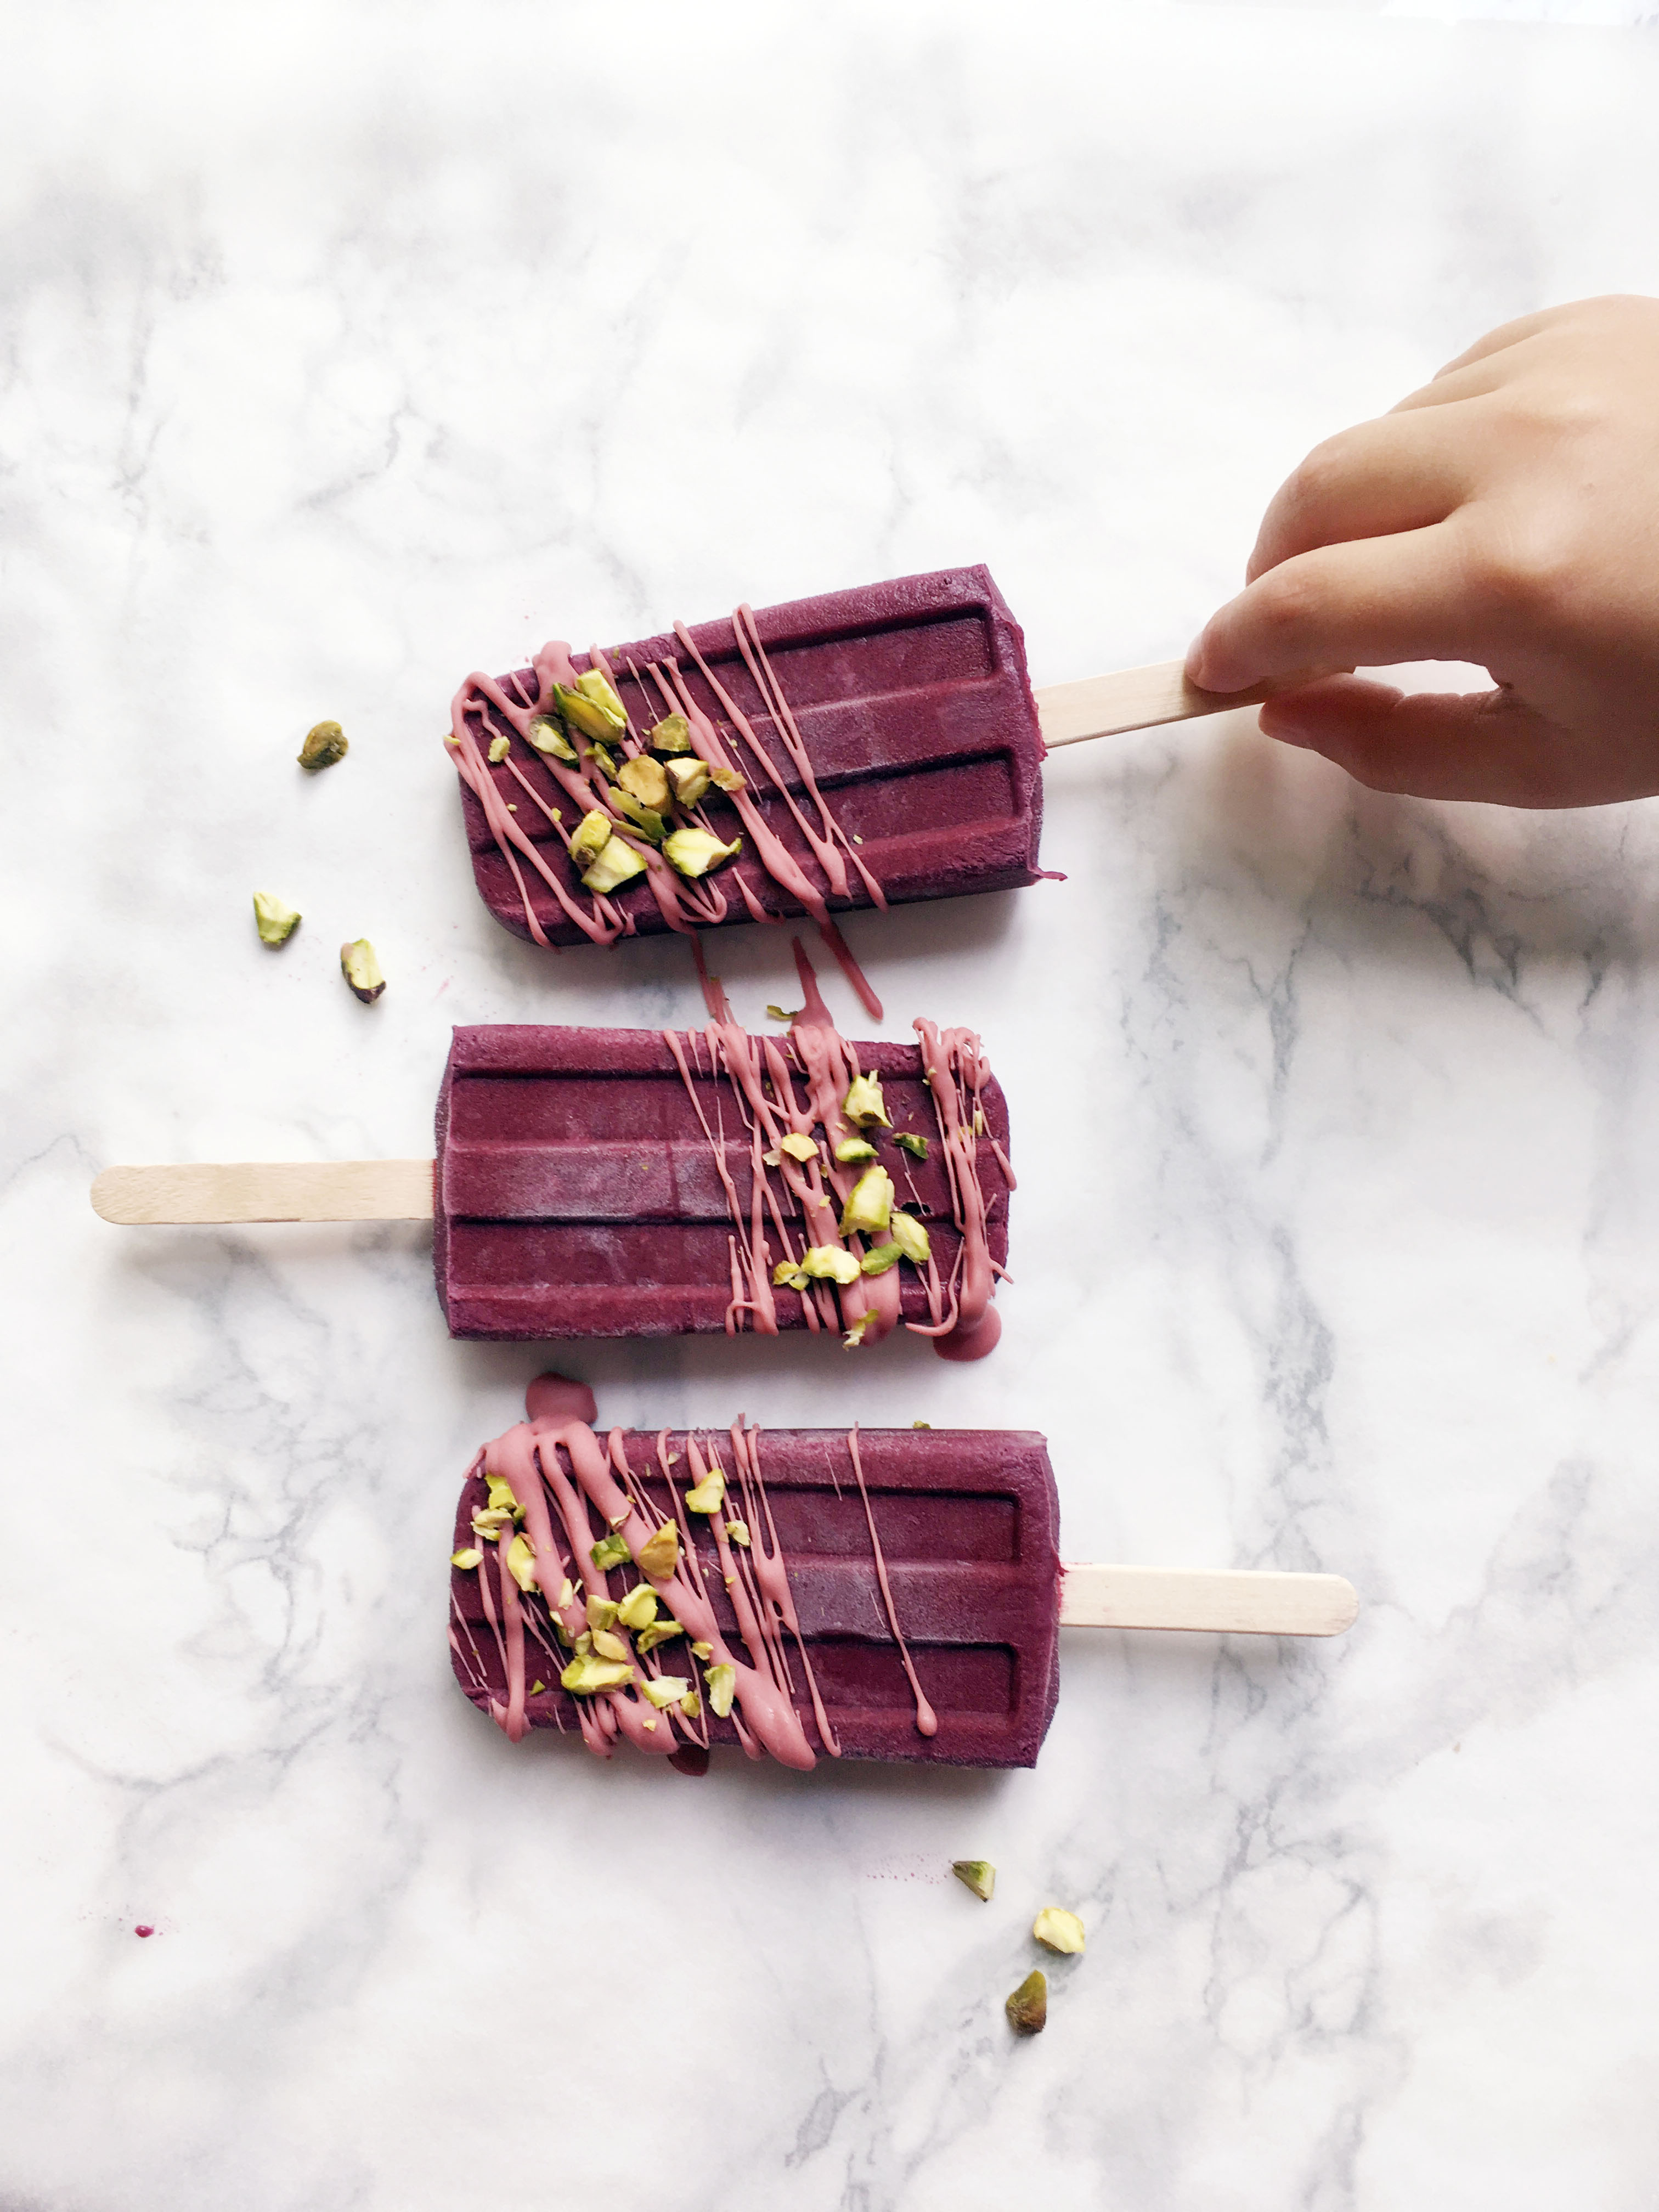 Low Histamine Blackberry Popsicle's - difficult to keep your hands off ;)